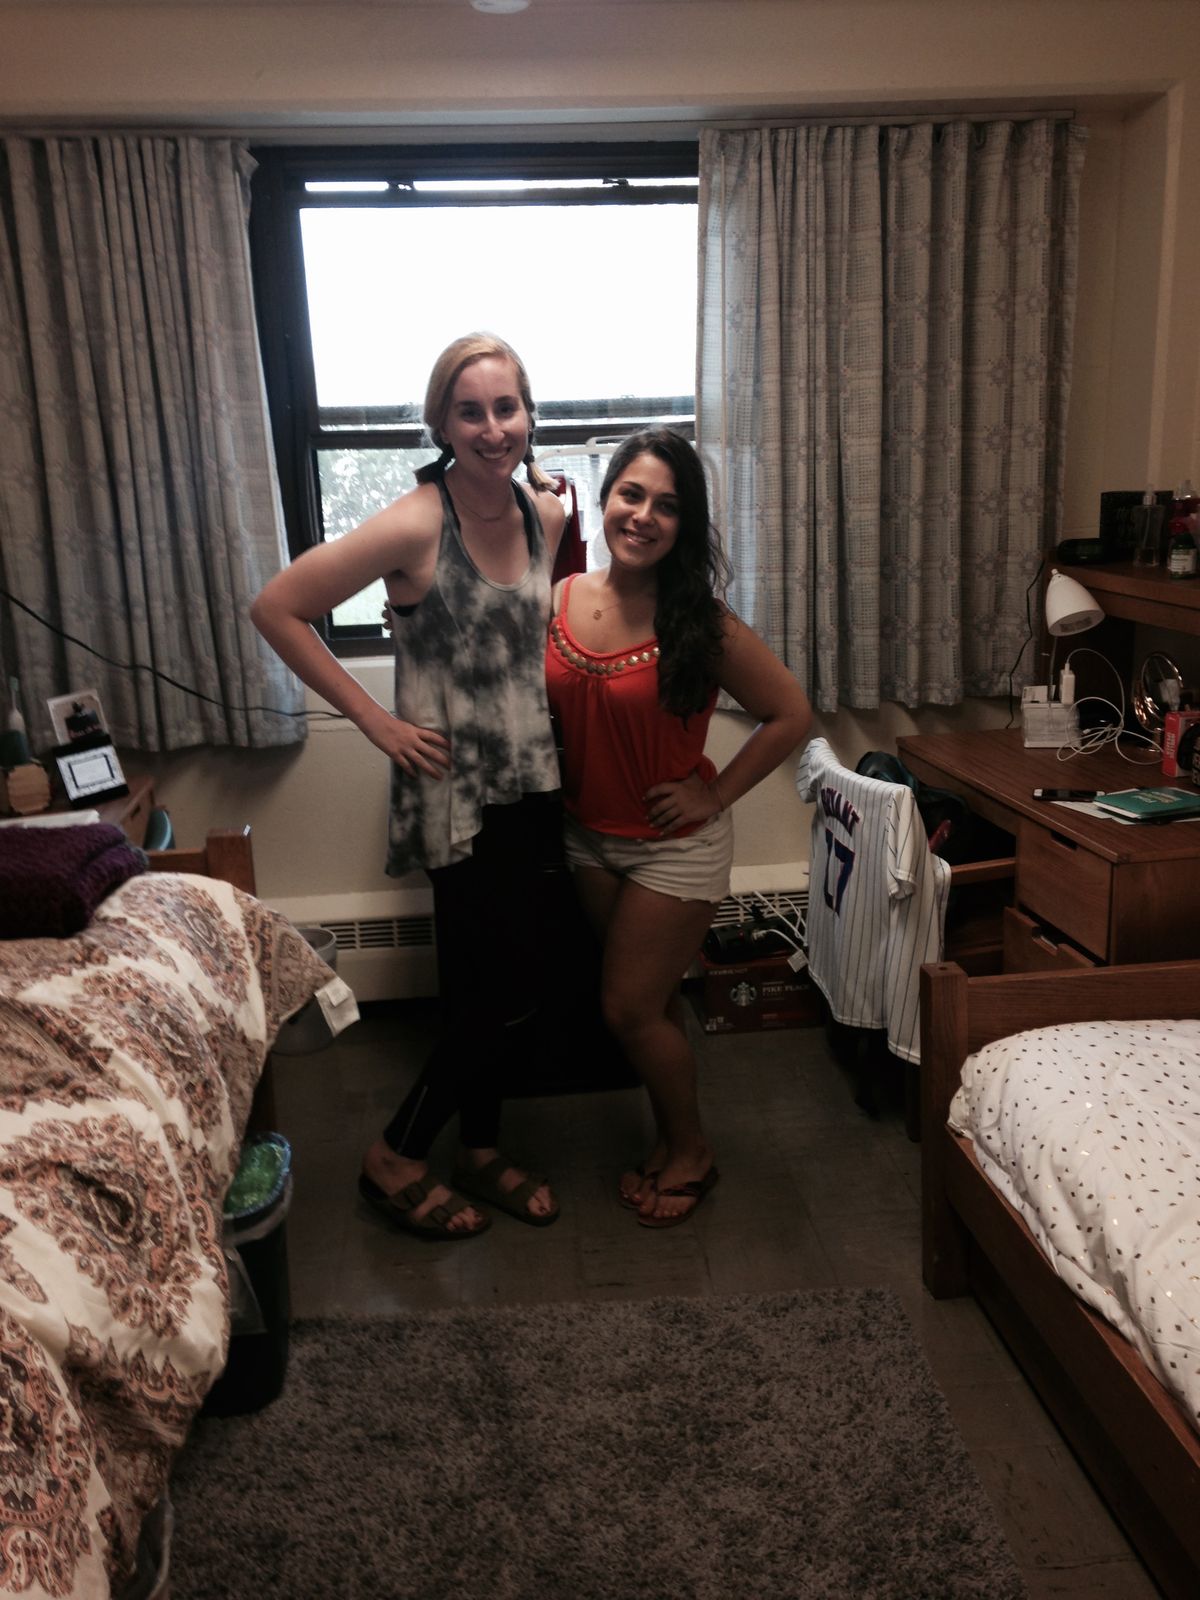 I Took The Risk And Roomed With Someone I Already Know For My Freshman Year, It Was The Best Decision I've Made